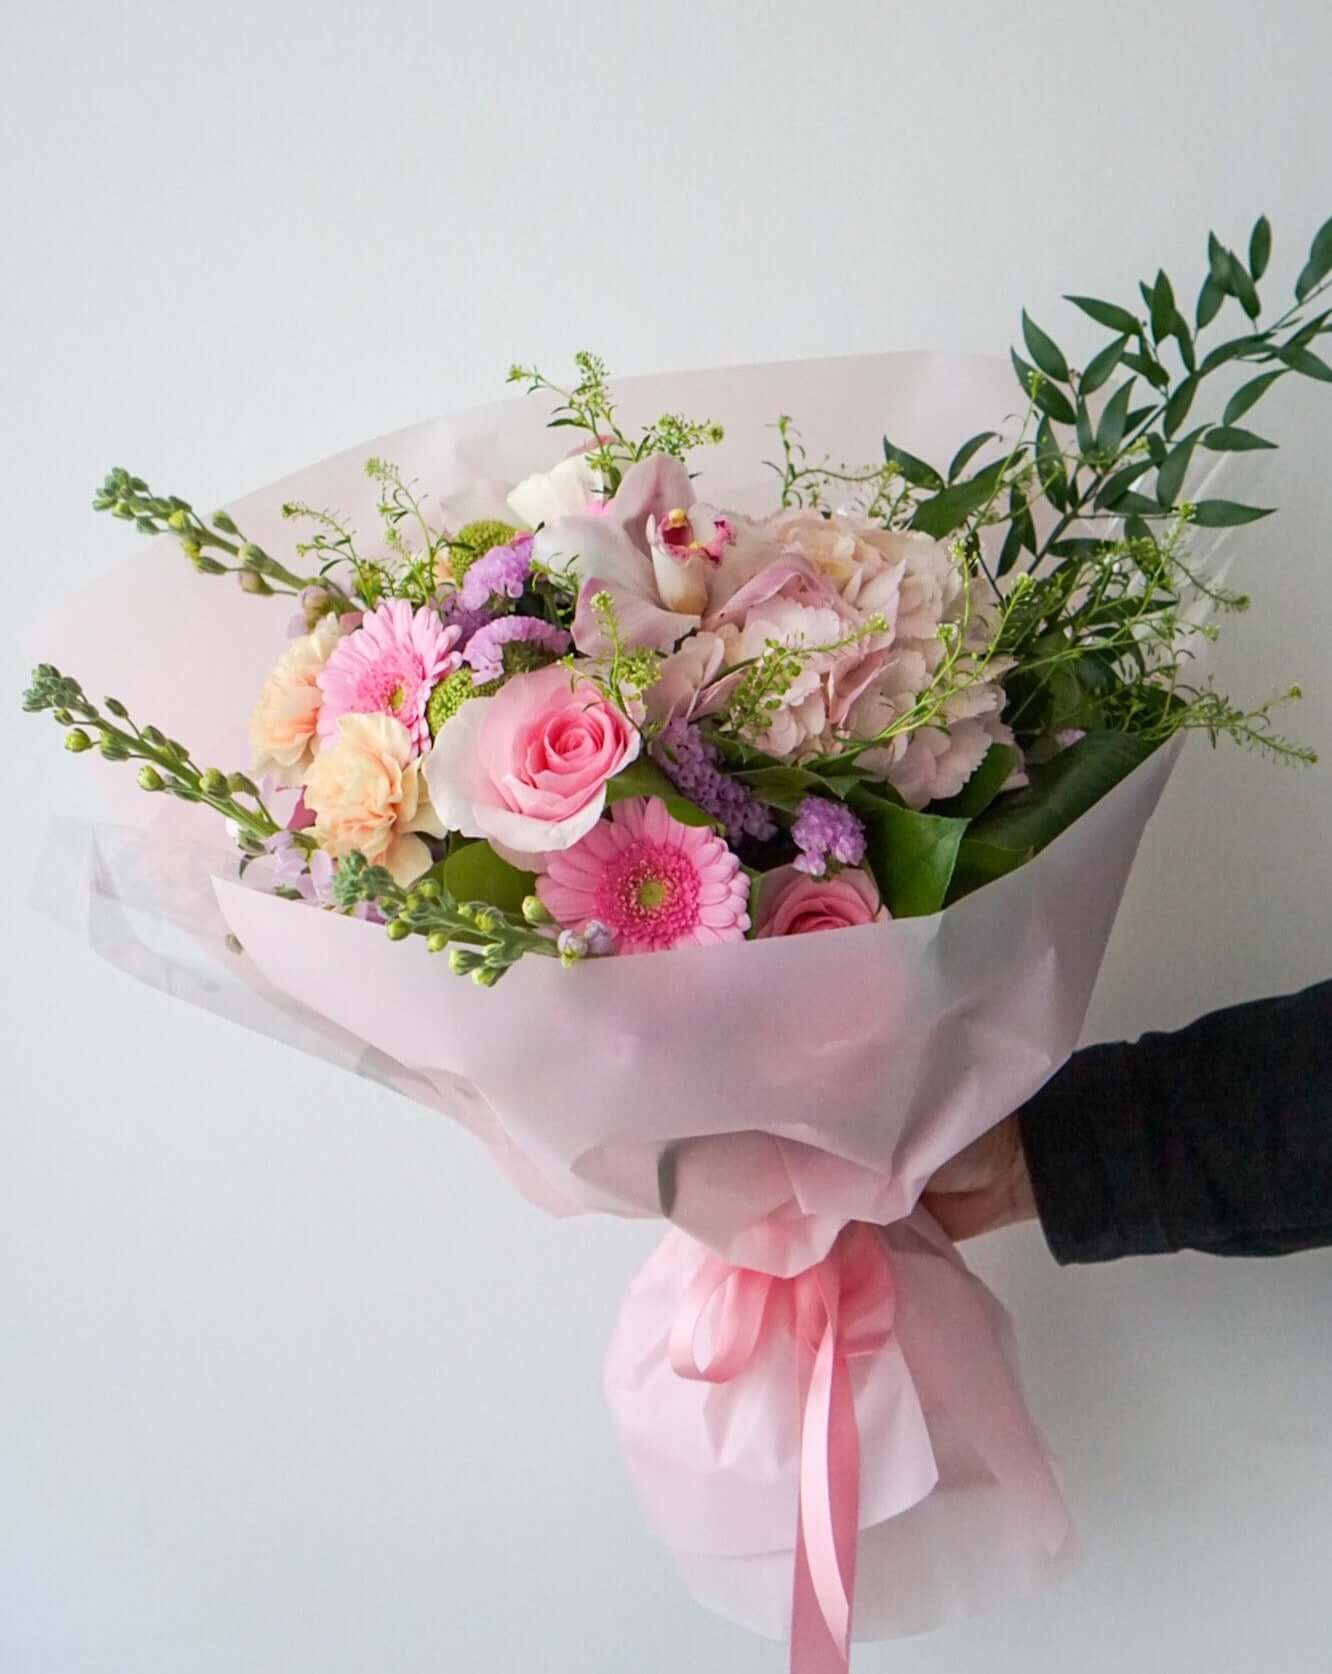 Divine pretty pinks artfully styled as a hand-tied bouquet and will be wrapped in tissue paper and cellophane, and the stems will be placed in a water bag.